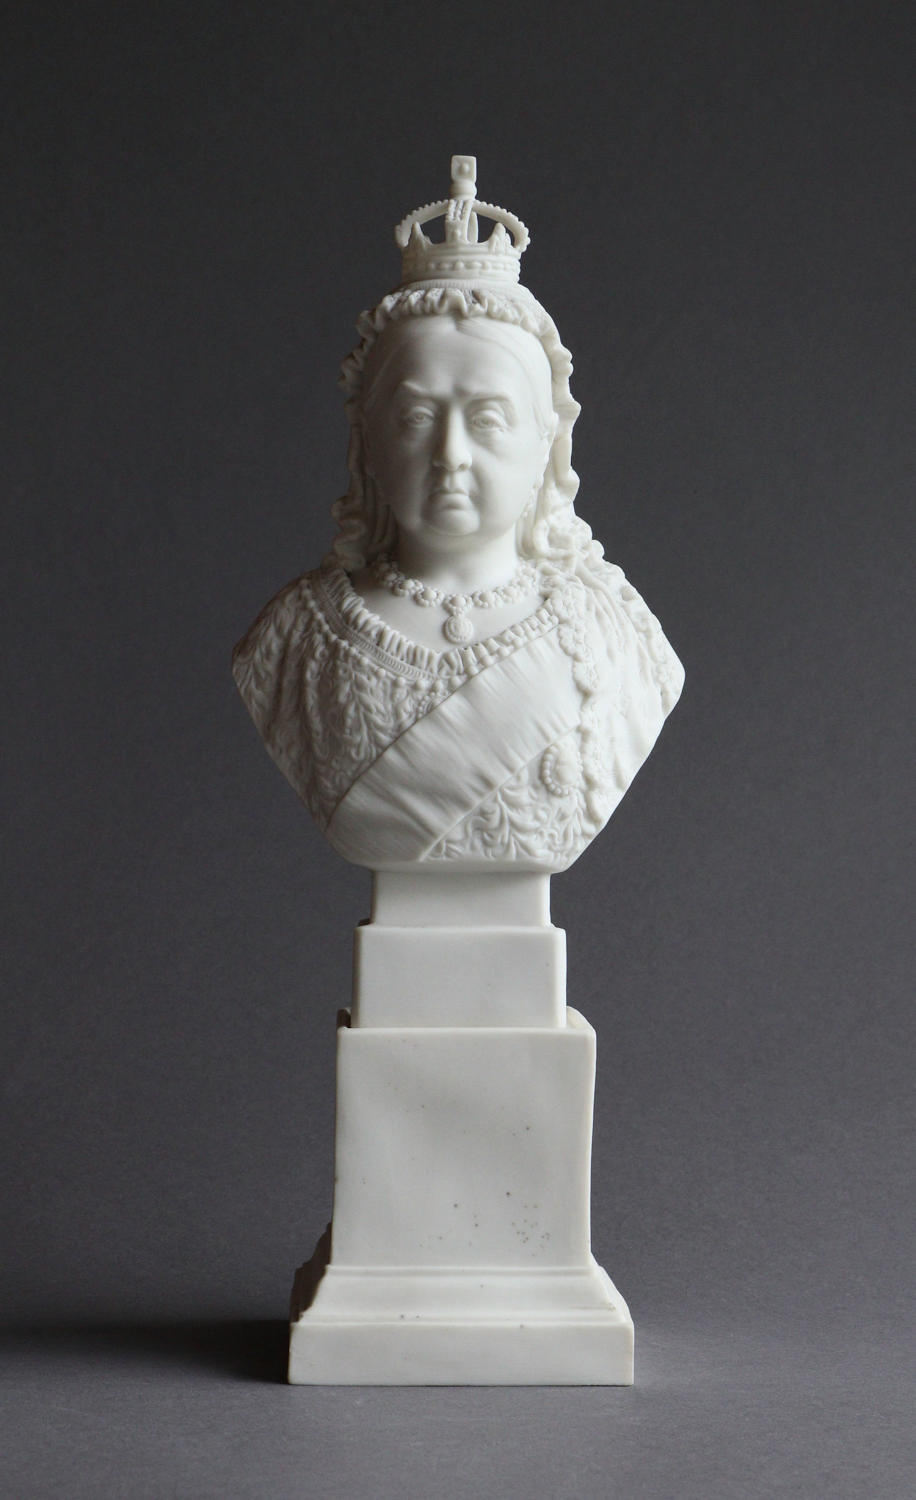 A small R&L Parian Diamond Jubilee bust of Queen Victoria on a plinth